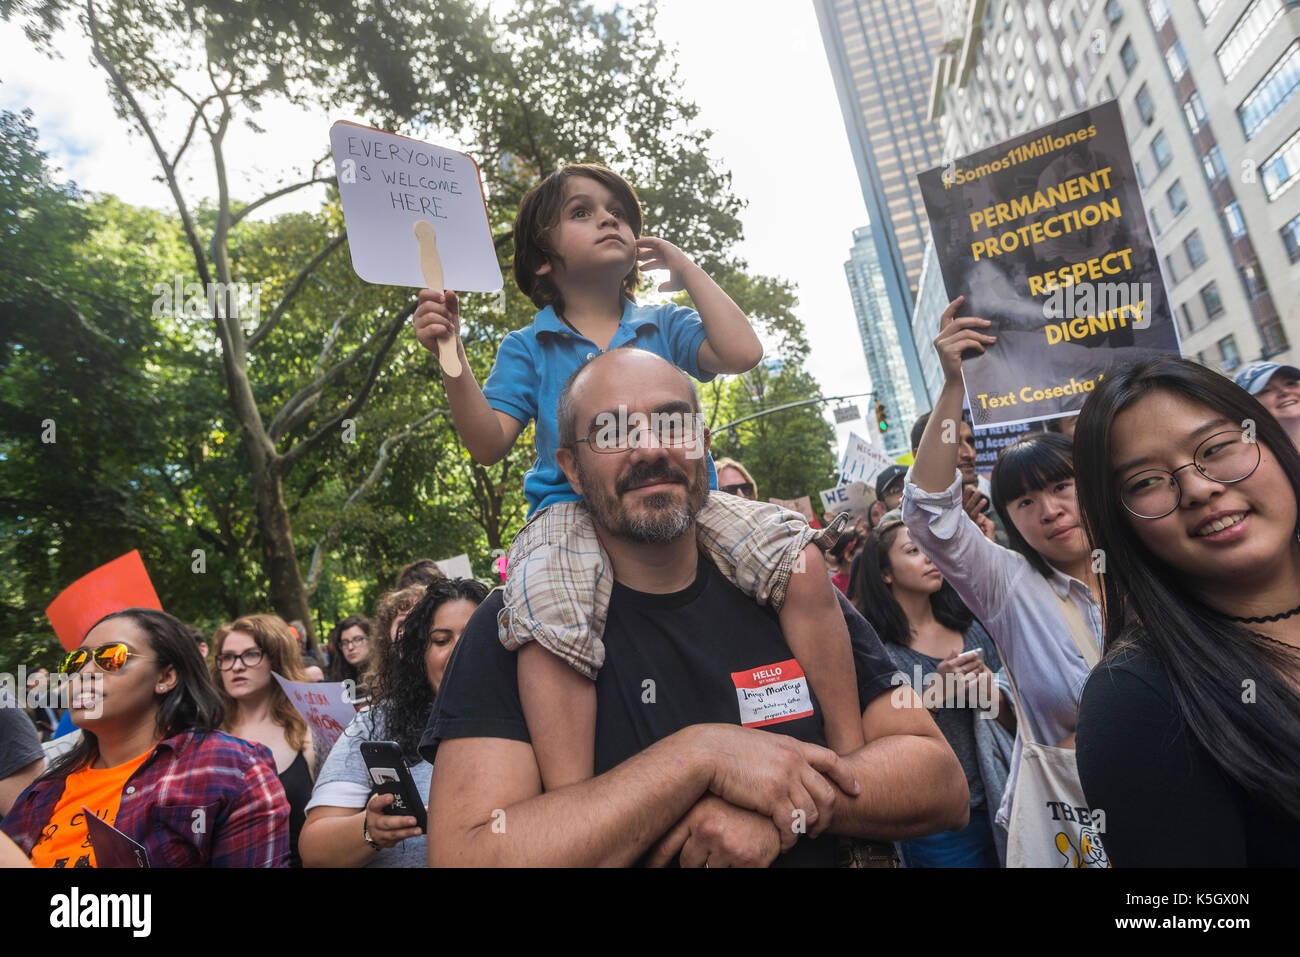 New York, NY 9 September 2017 - Several thousand 'Dreamers, ' the children of undocumented immigrants, and immigration activists gathered outside Trump Hotel and Towers in Columbus Circle, to speak out against an end to DACA (Deferred Action for Childhood Arrivals) after trump's attempts to dismantled. CREDIT: ©Stacy Walsh Rosenstock/Alamy Stock Photo